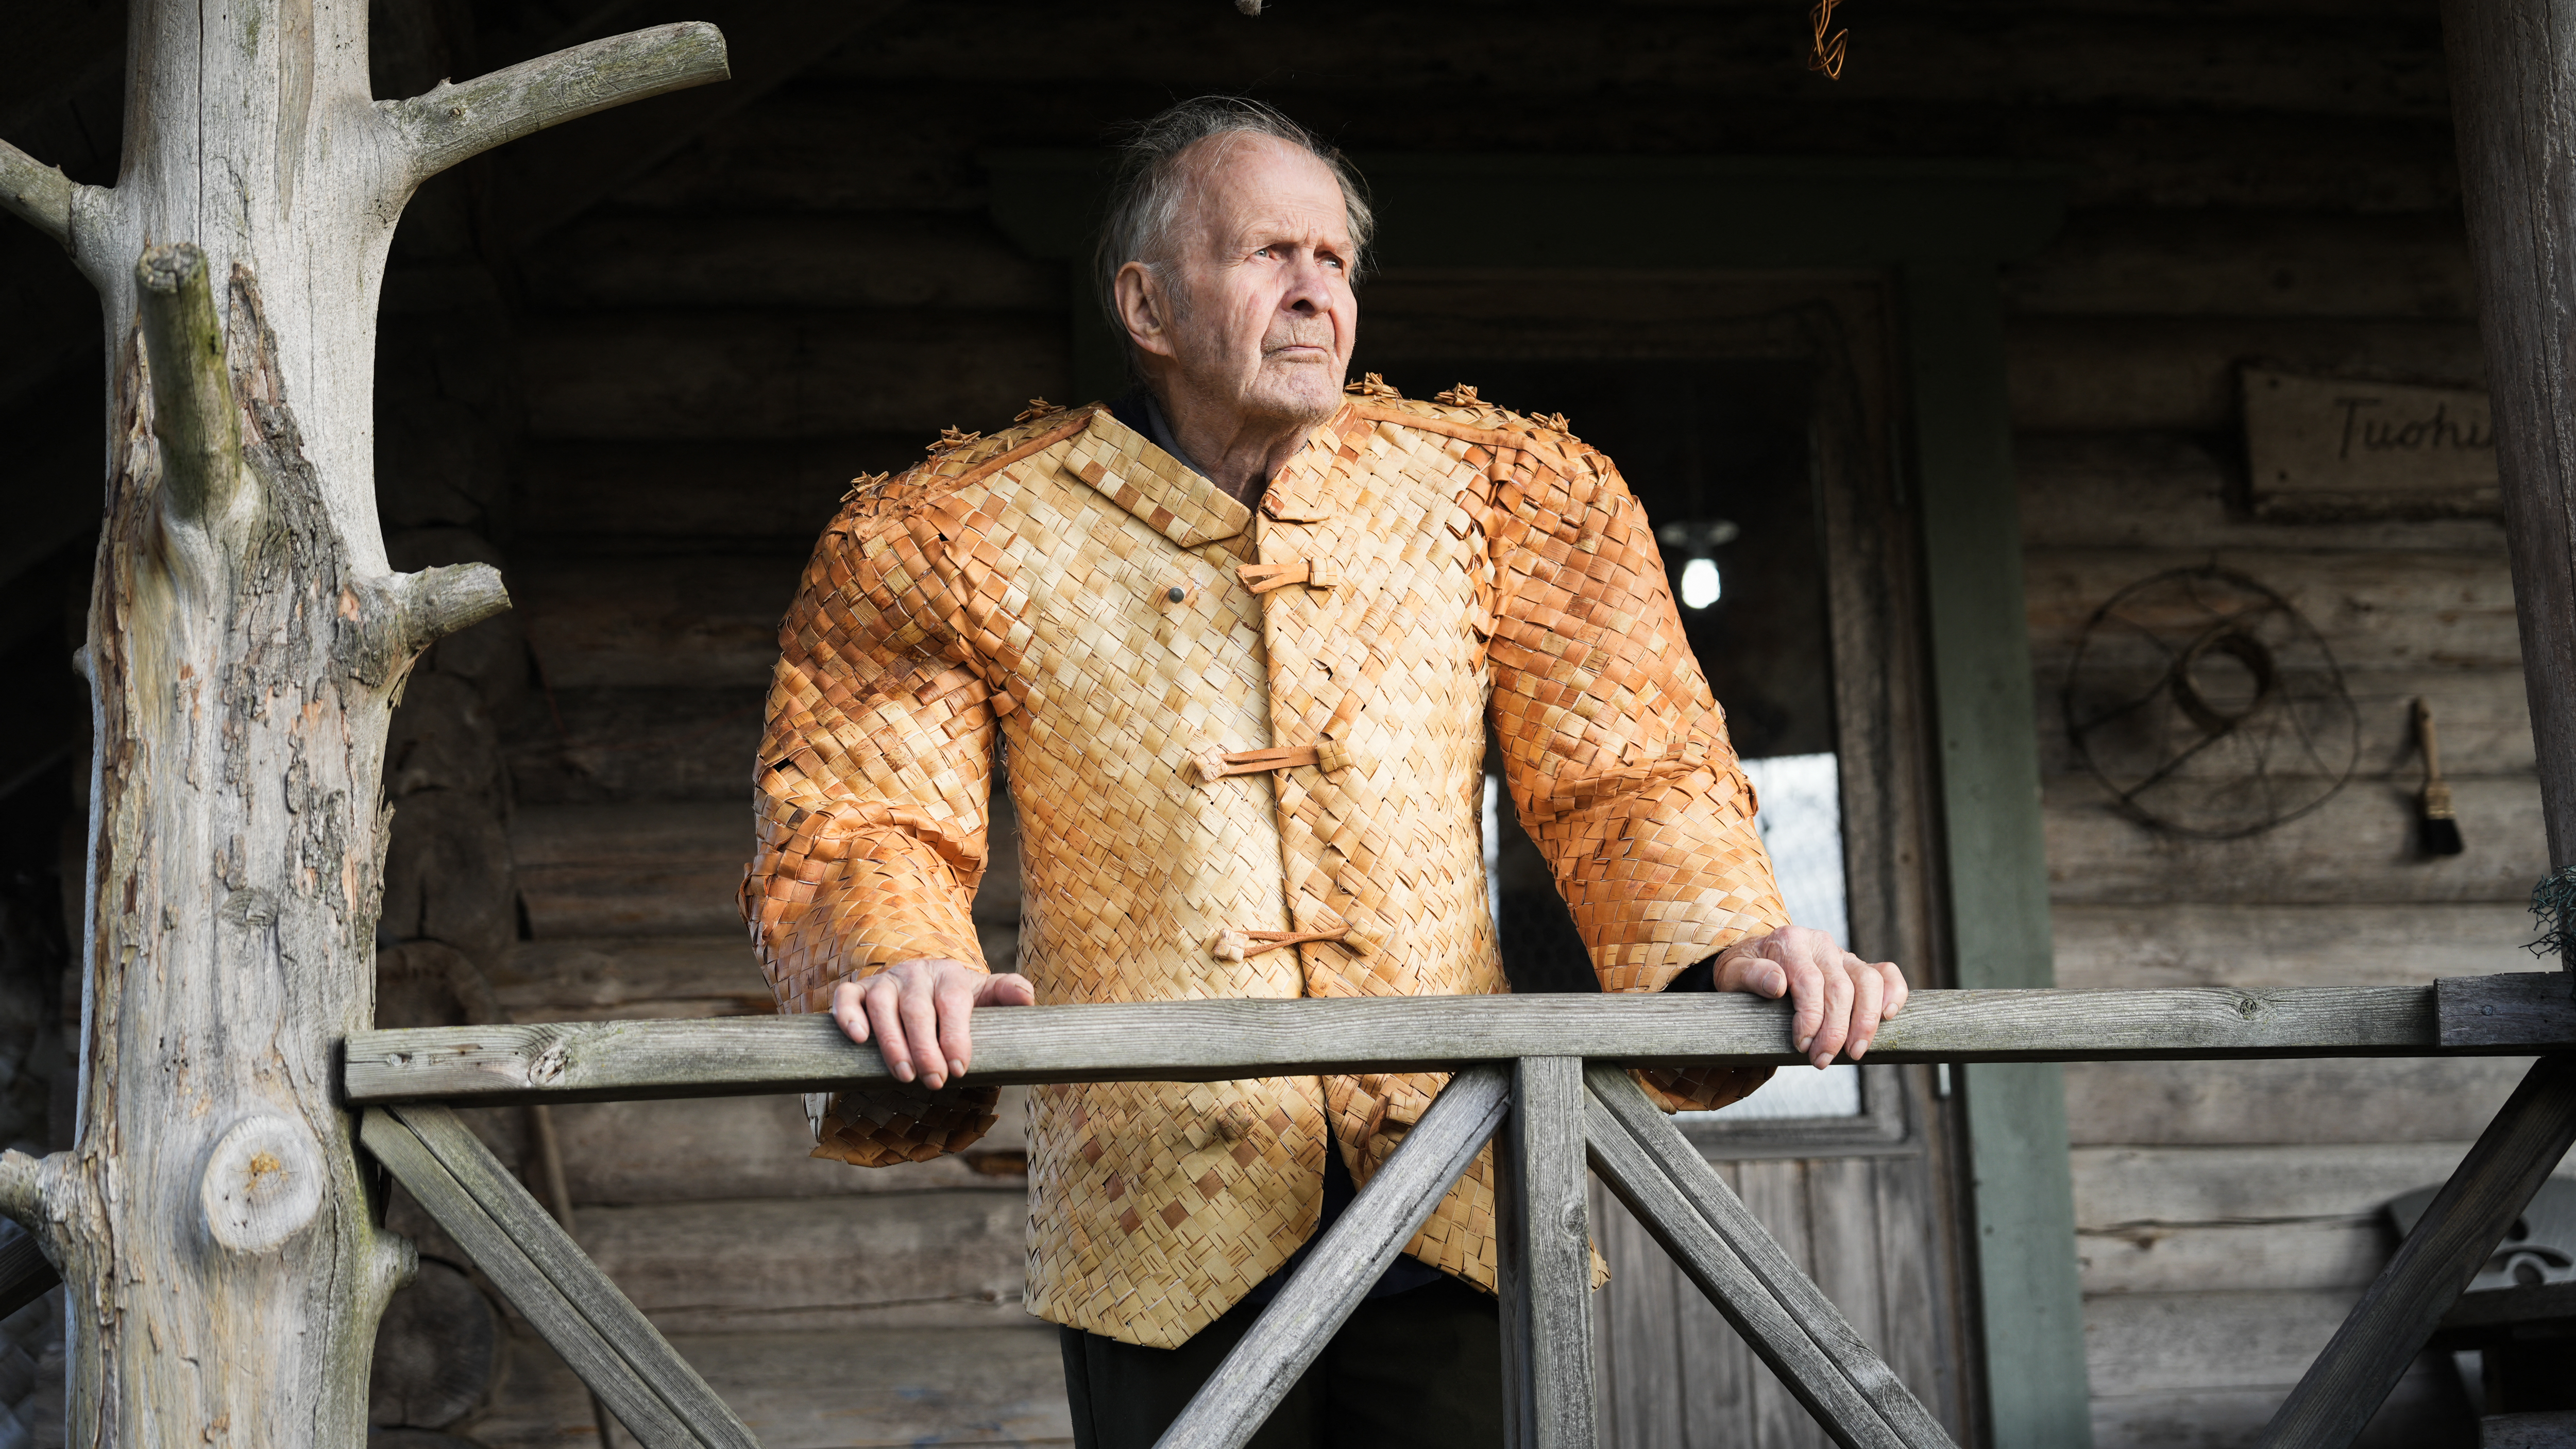 Erkki Pekkarinen poses wearing a jacket he made from birch tree bark in front of his shop in Asikkala, Finland. /Alessandro Rampazzo/AFP